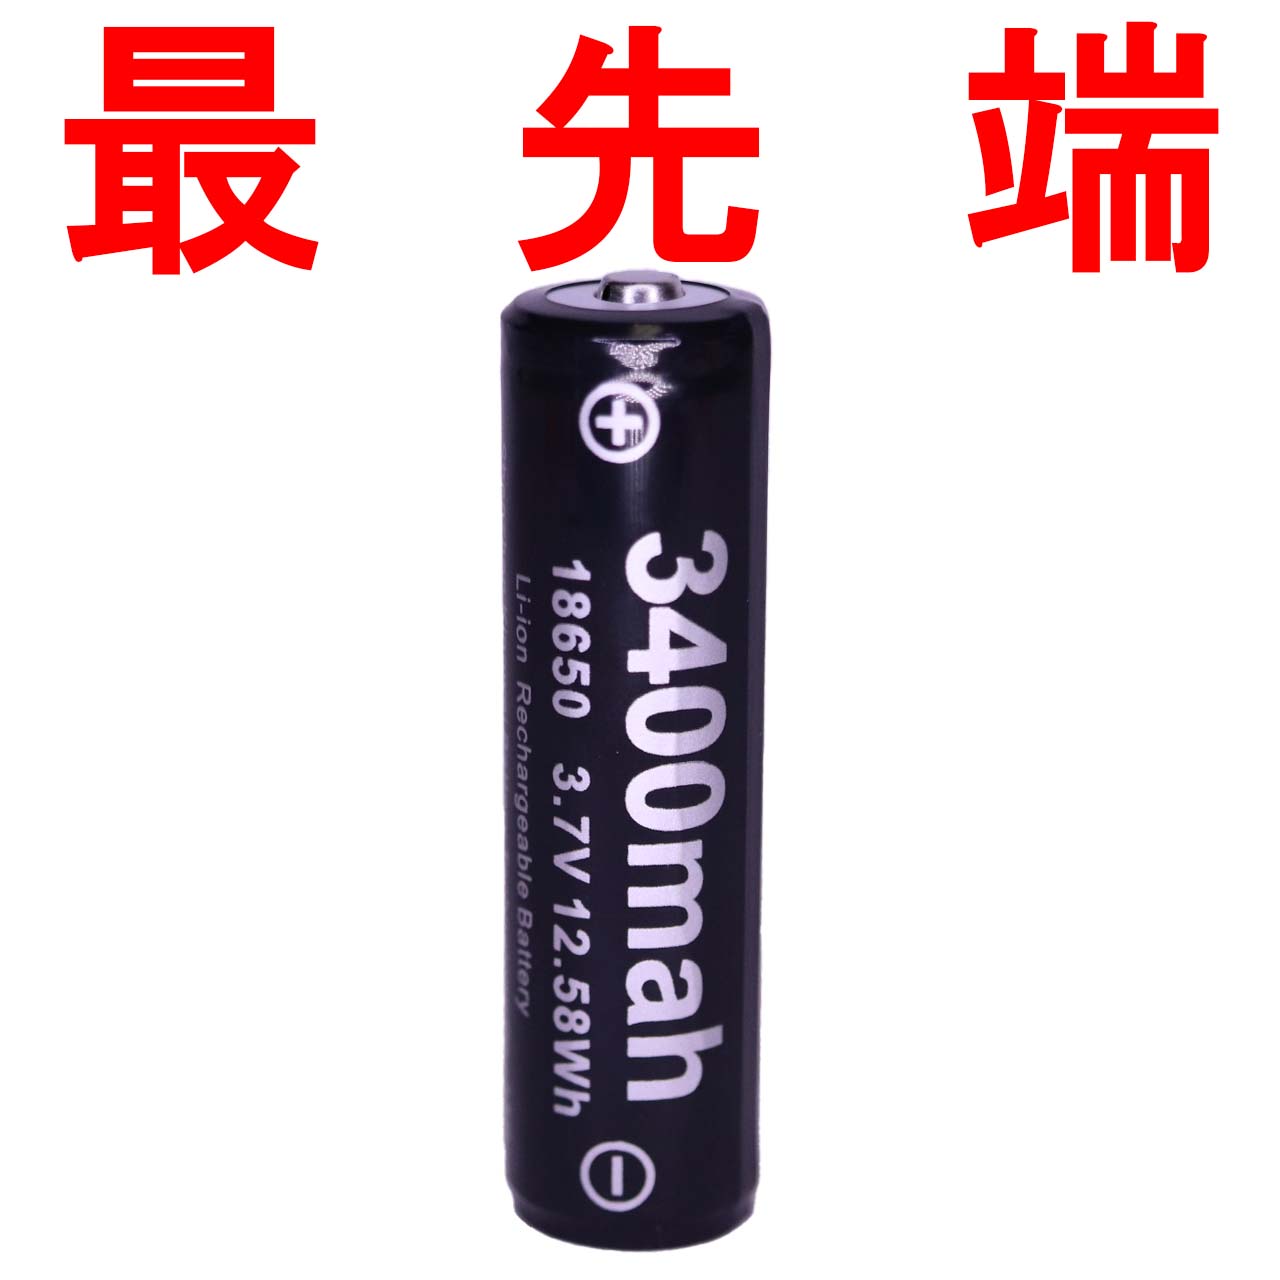 18650 lithium ion battery lithium battery rechargeable battery battery charger lithium ion rechargeable battery battery PSE protection circuit 3400mah